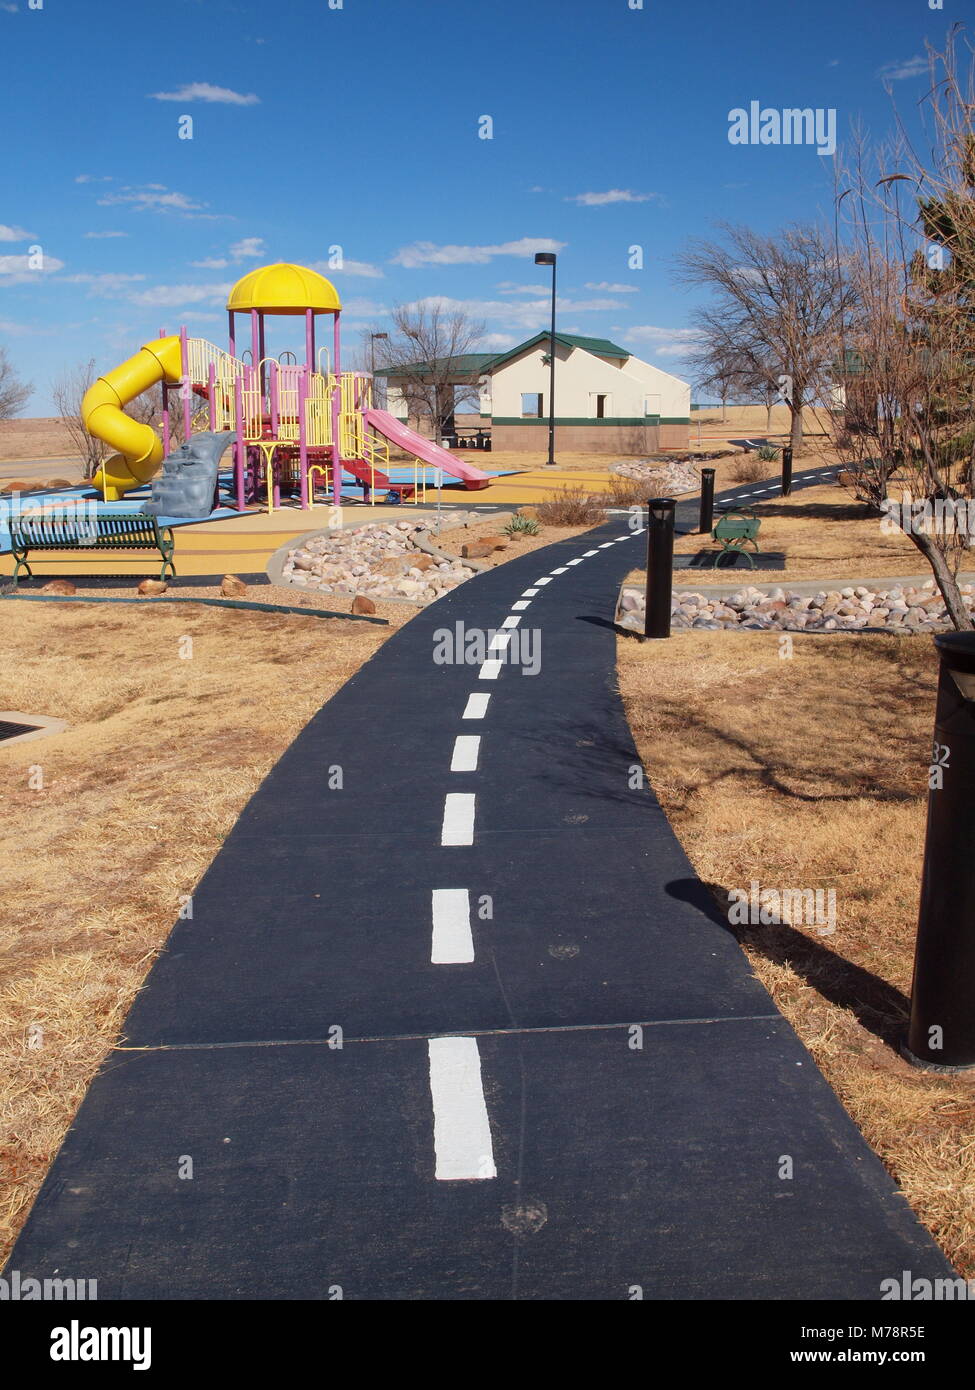 Rest area in East Texas built to replicate the old Route 66 with striped sidewalks. Stock Photo